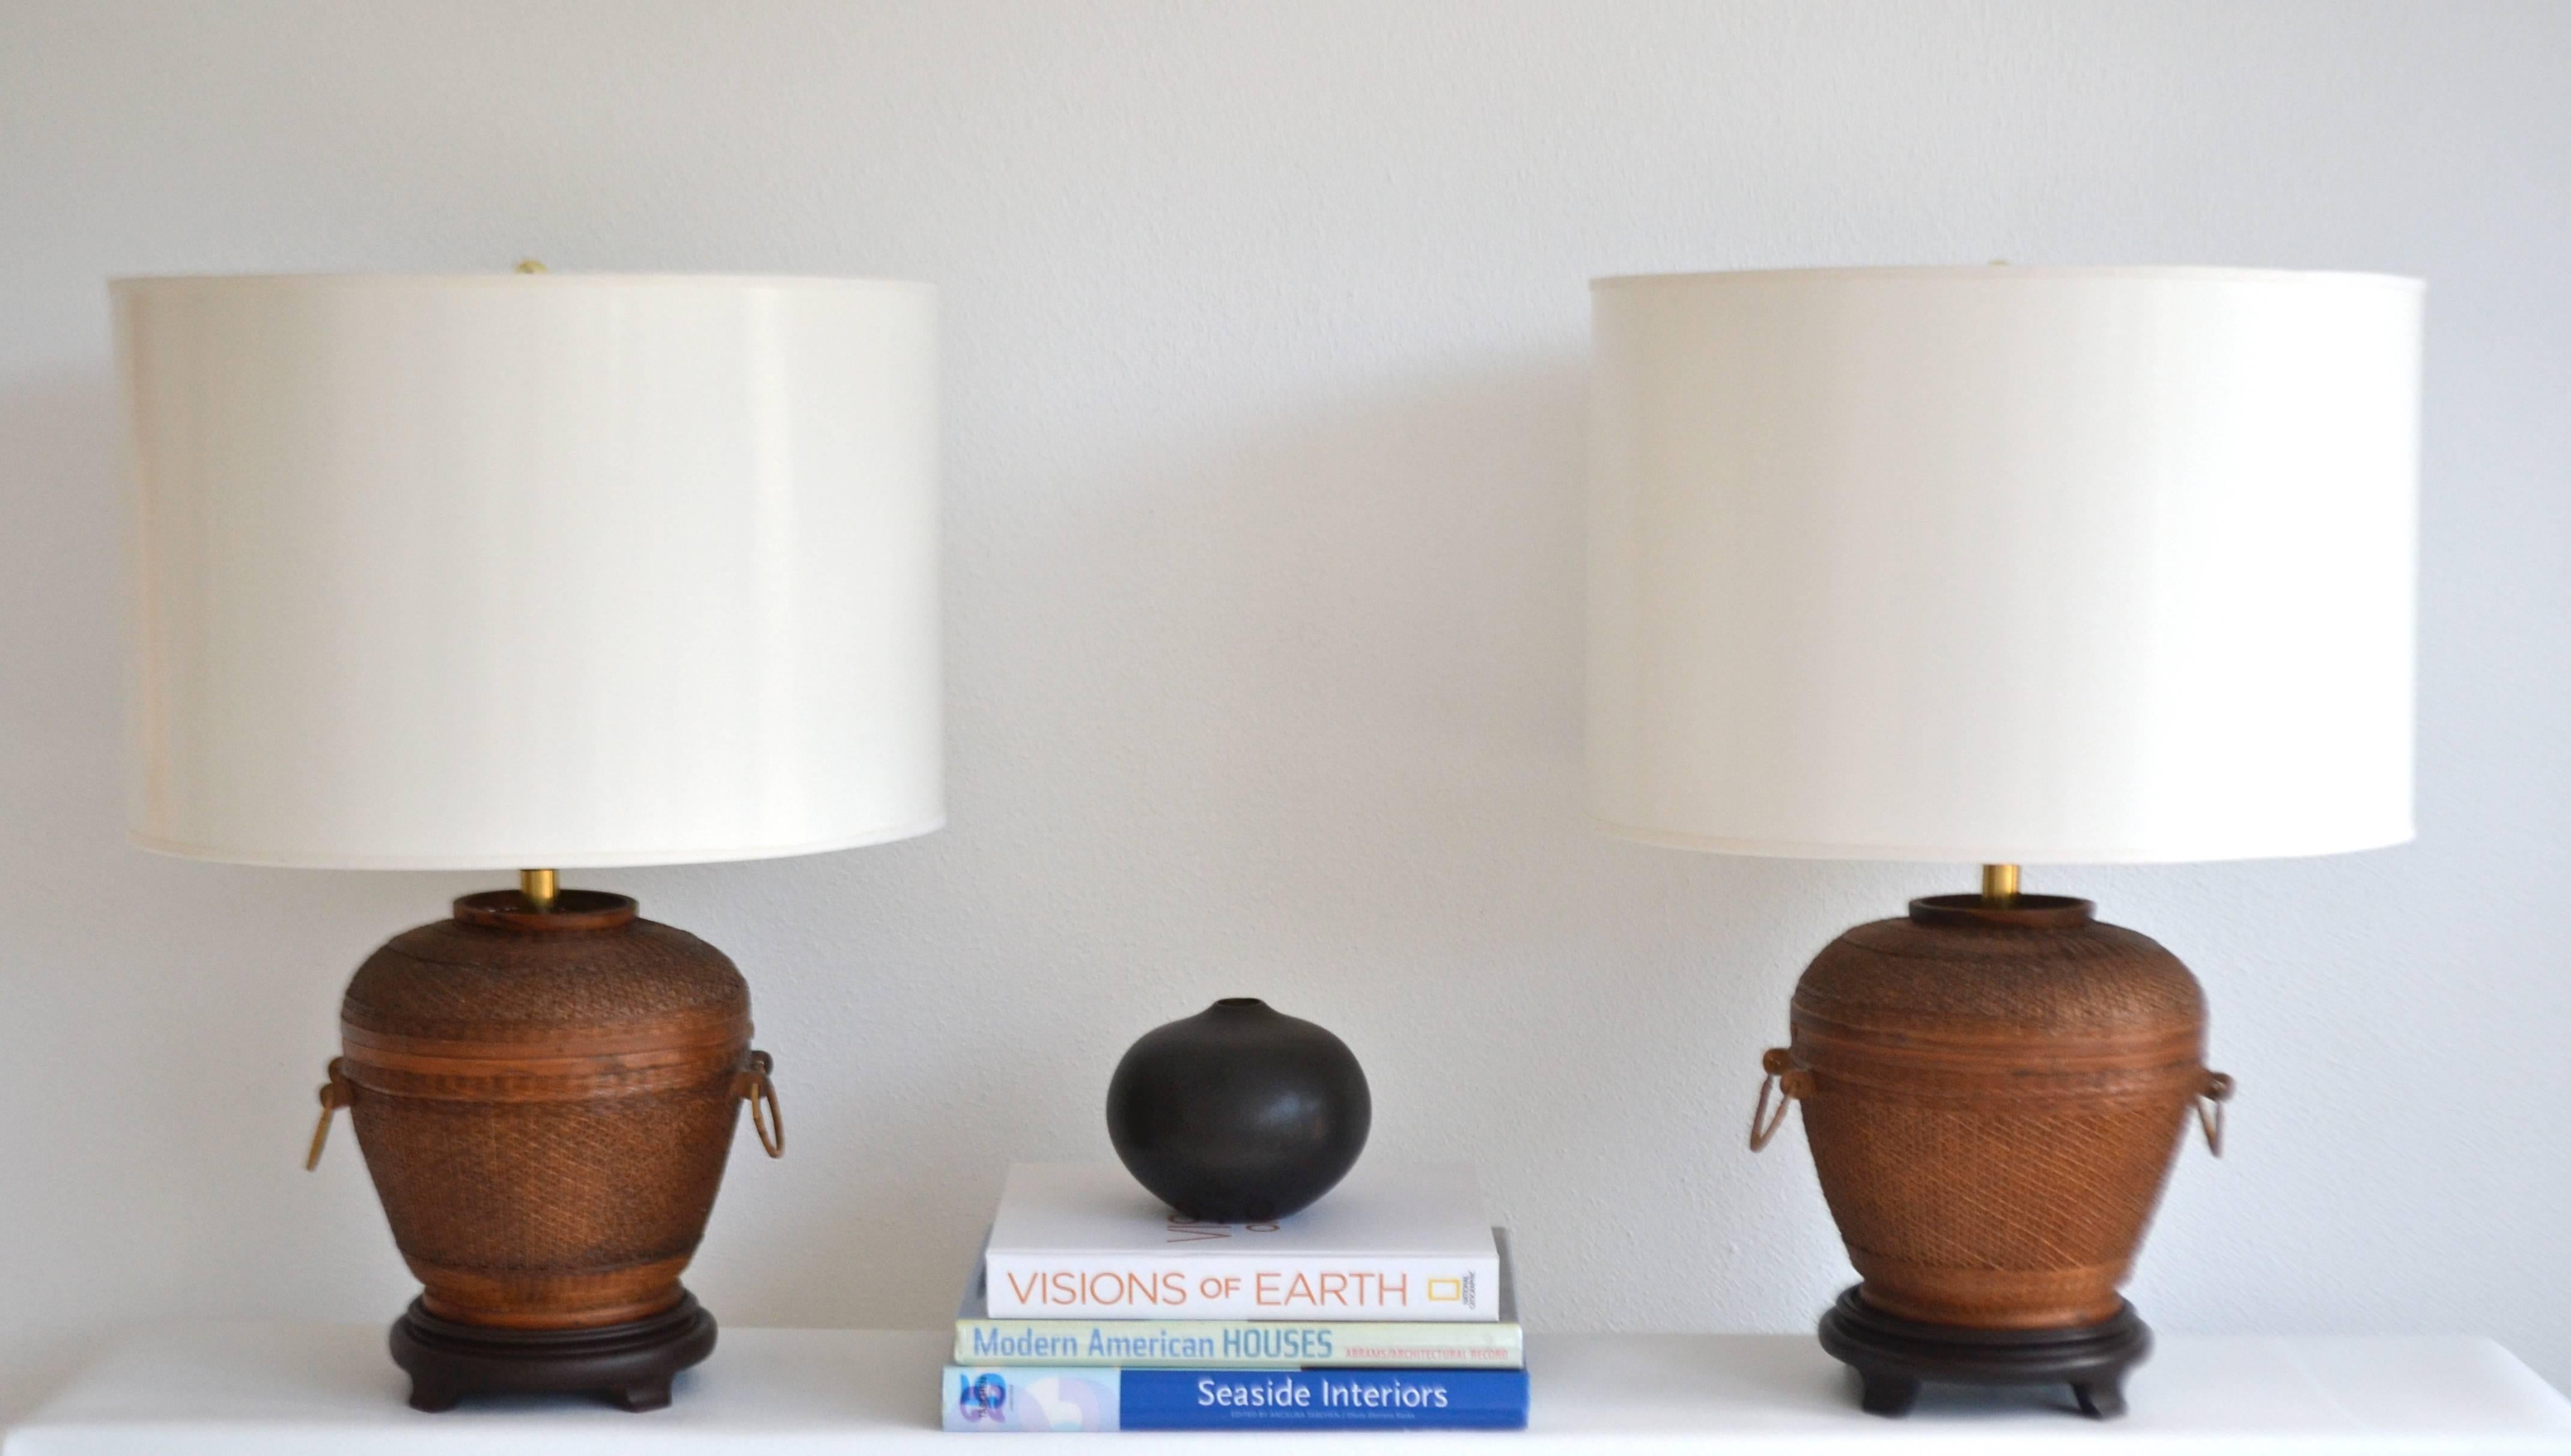 Striking pair of Mid-Century woven reed basket form table lamps, circa 1950s-1960s. These sculptural lamps are mounted on carved hardwood bases and wired with brass fittings.
Shades not included.
Measurements: Overall dimensions: 25